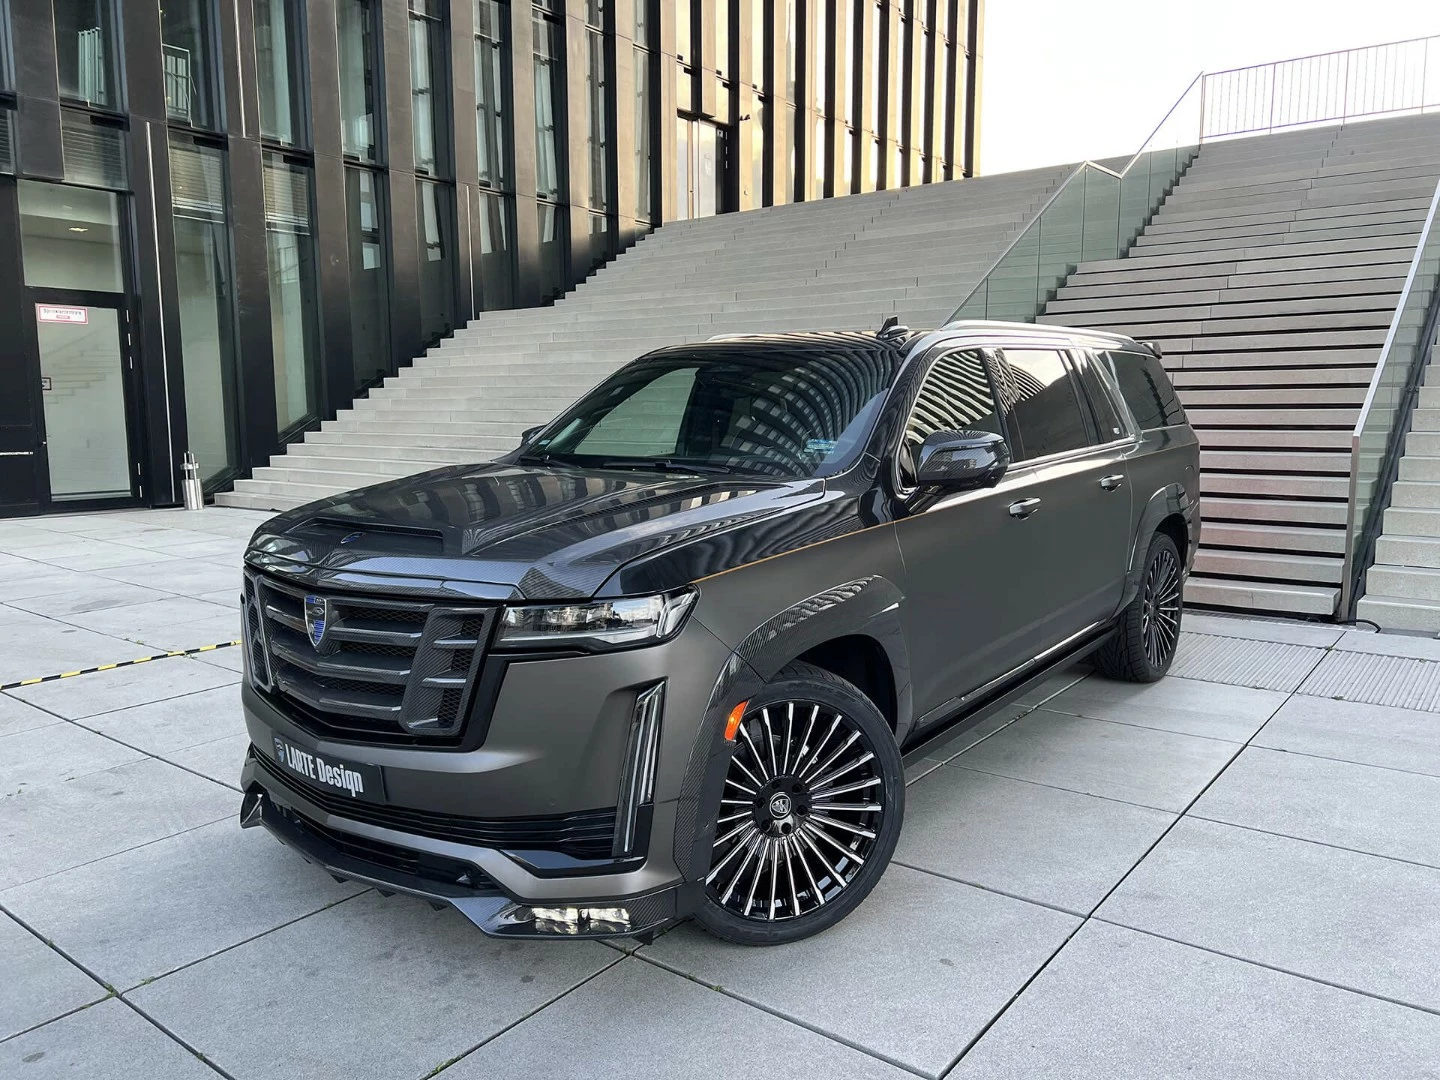 Example of the cadillac escalade wide body kit